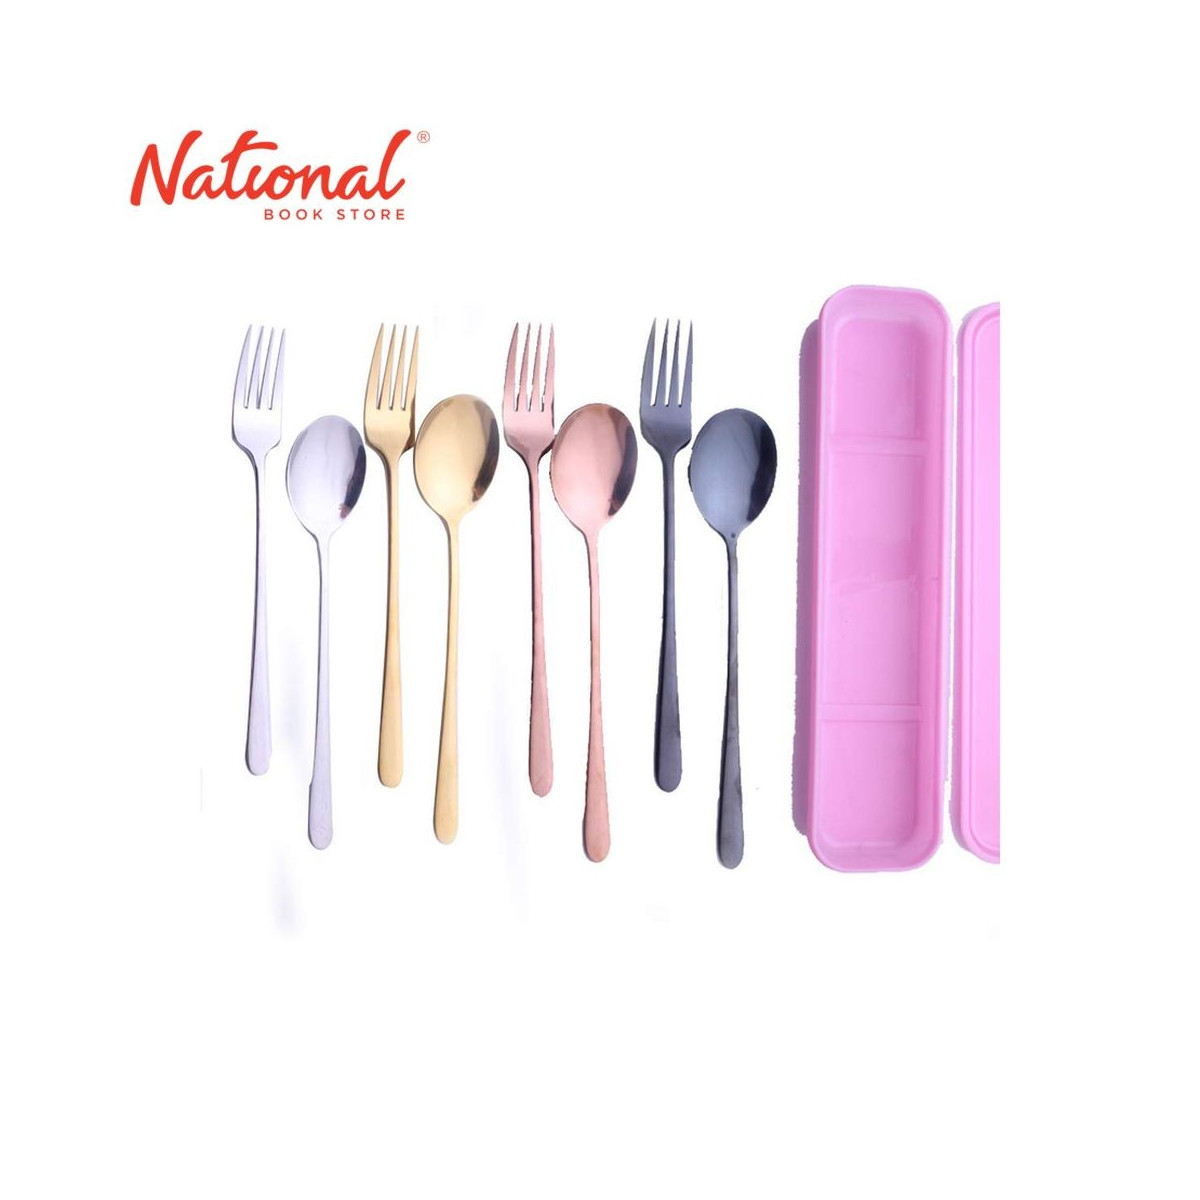 SPOON & FORK SET ASSORTED COLORS